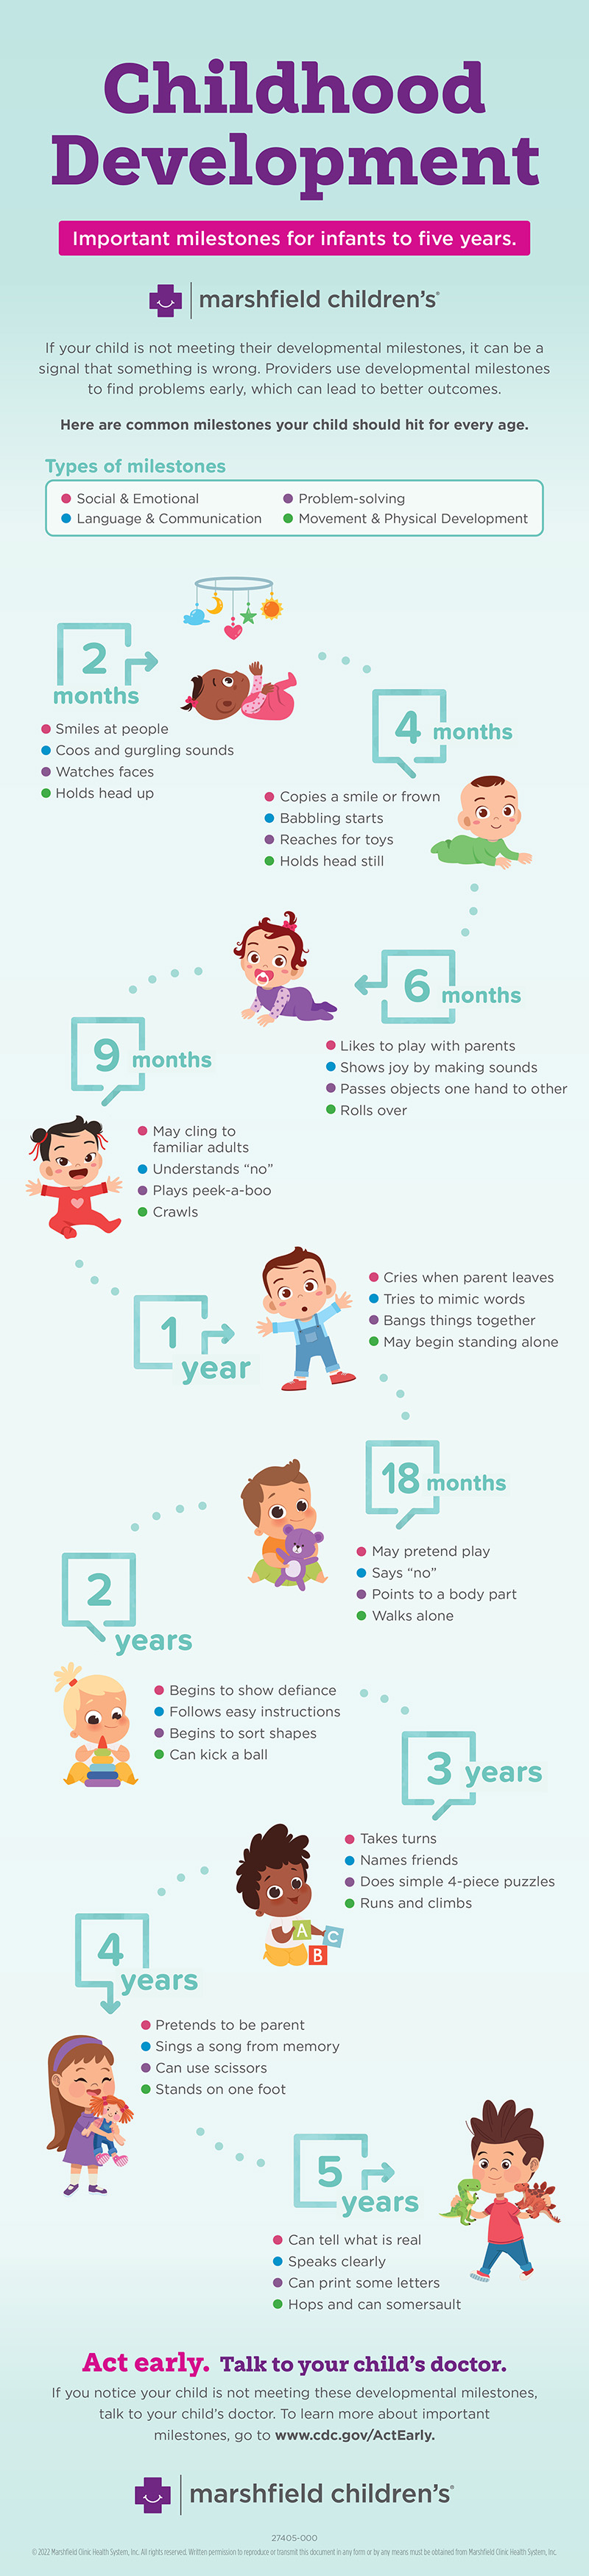 child development infographic that shows baby milestones and developmental milestones